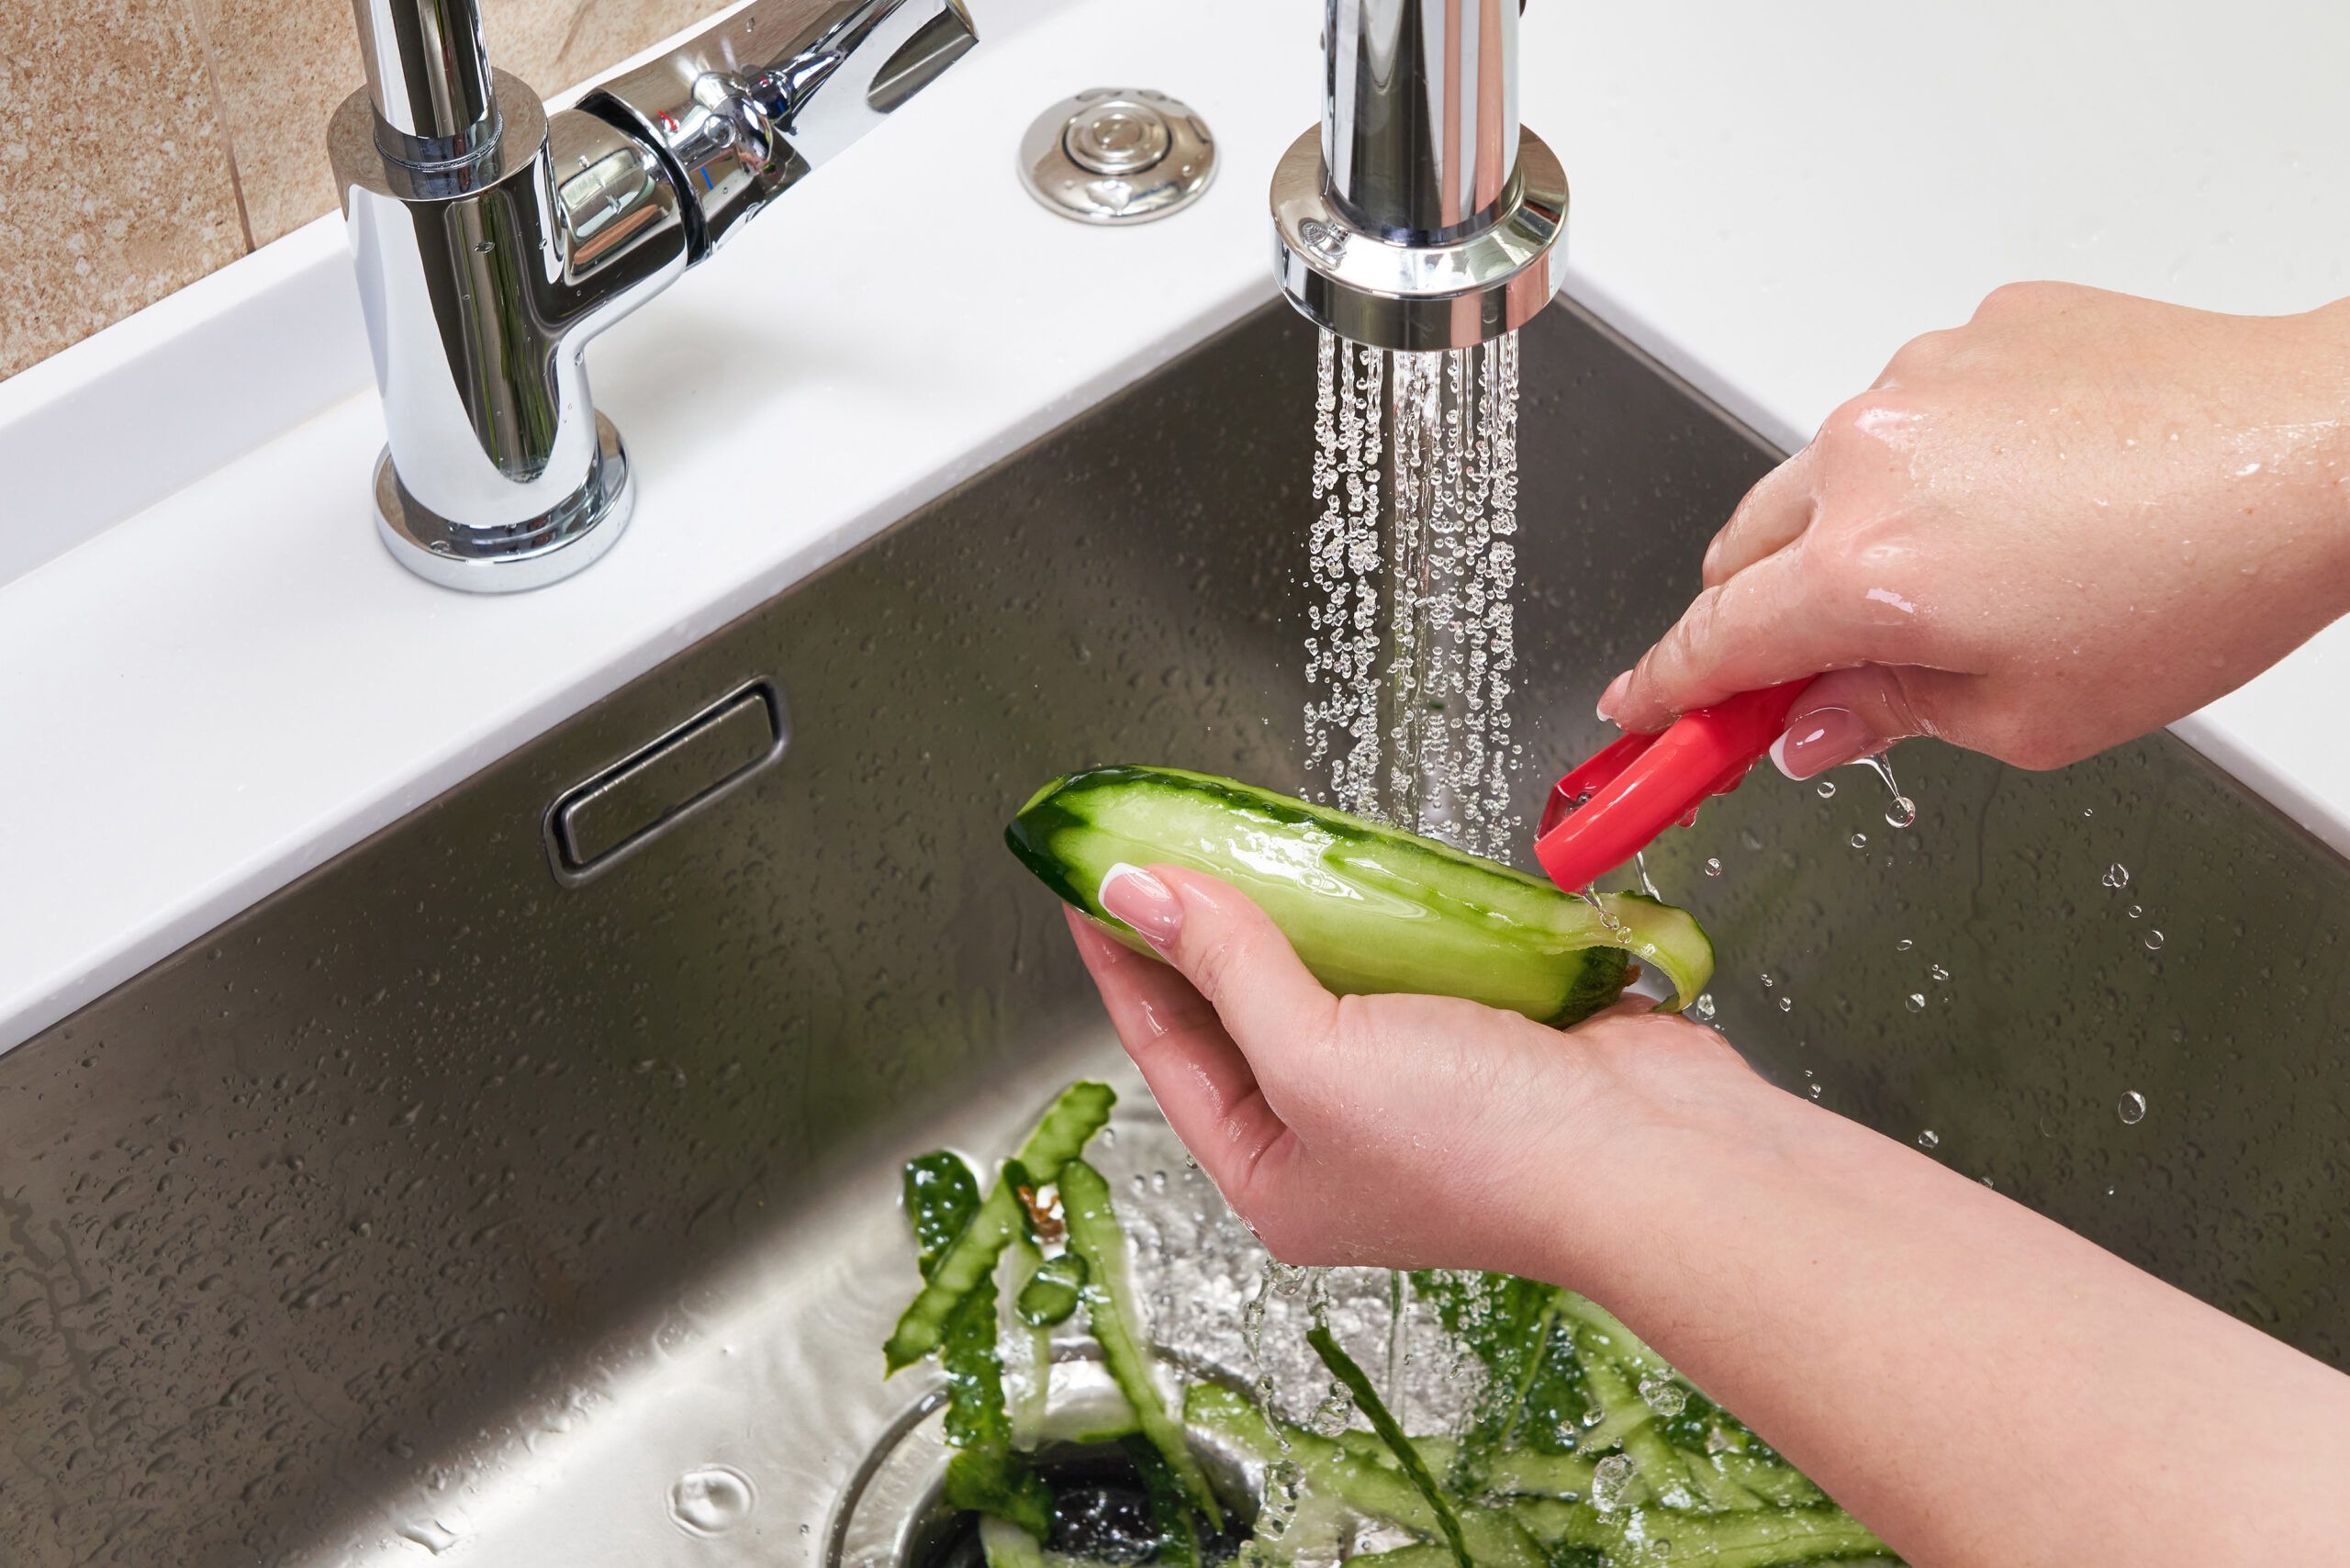 Kitchen sink not draining? Here are 6 ways to unclog it